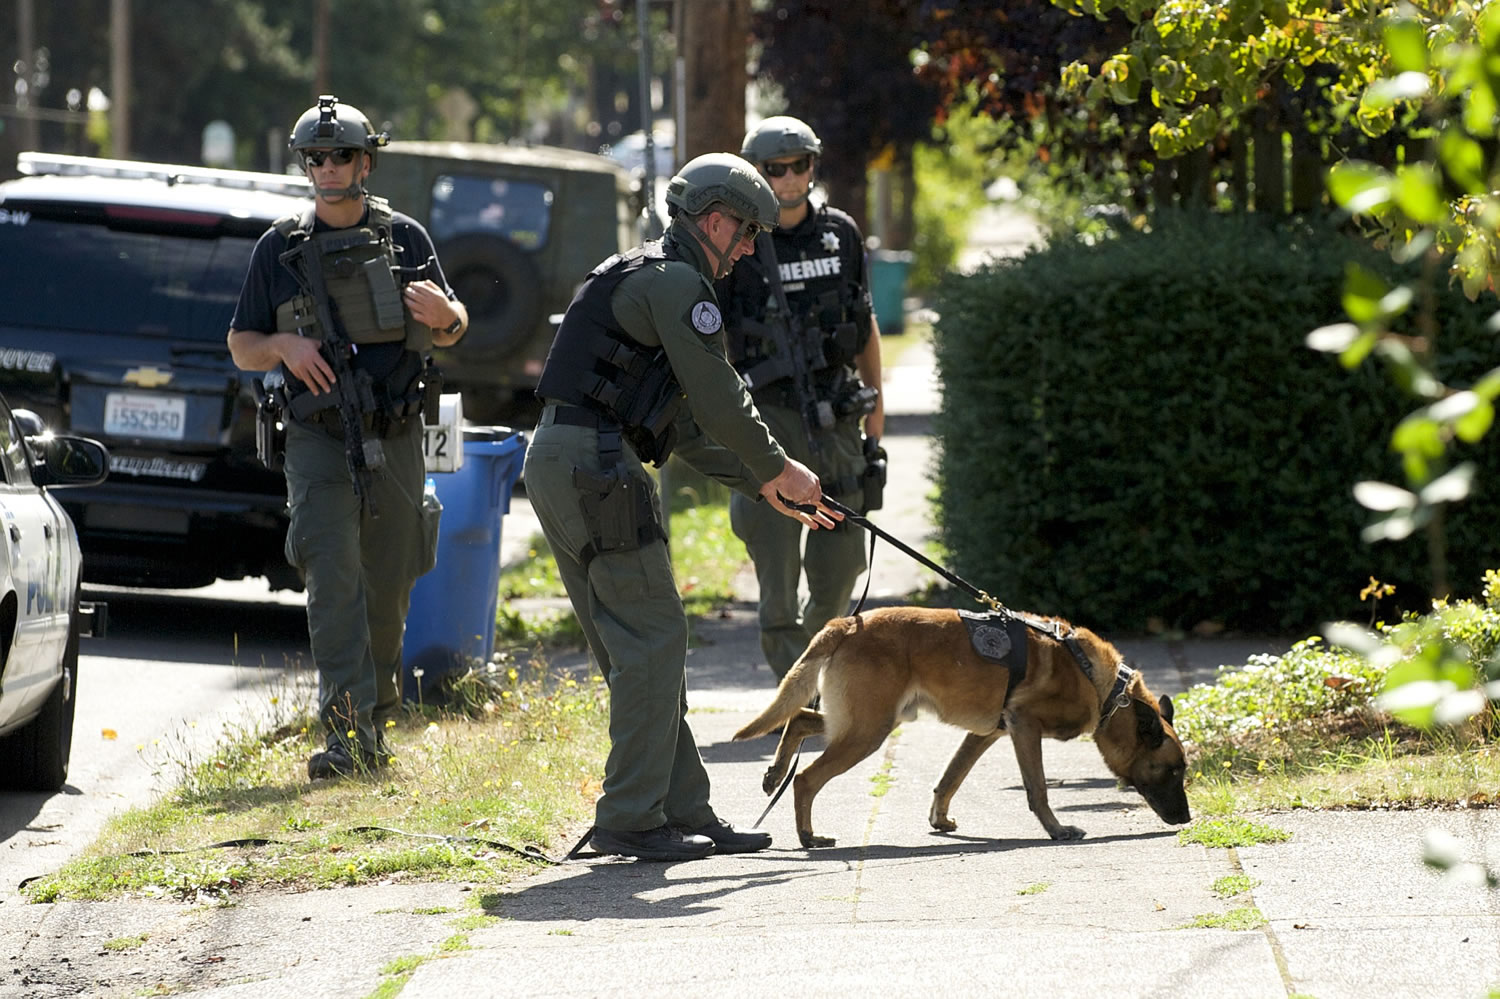 Police search for a homicide suspect near the intersection of Fourth Plain and Kauffman, Thursday, September 25, 2014.